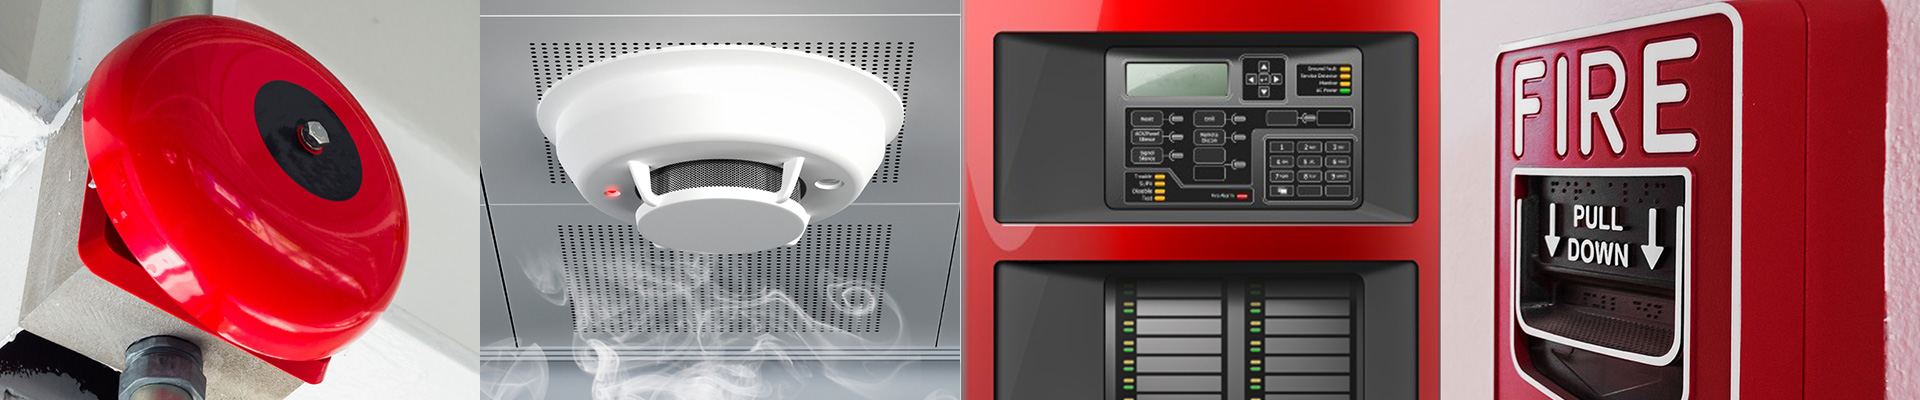 Fire Alarm Systems Sécutrol Fire protection and security systems